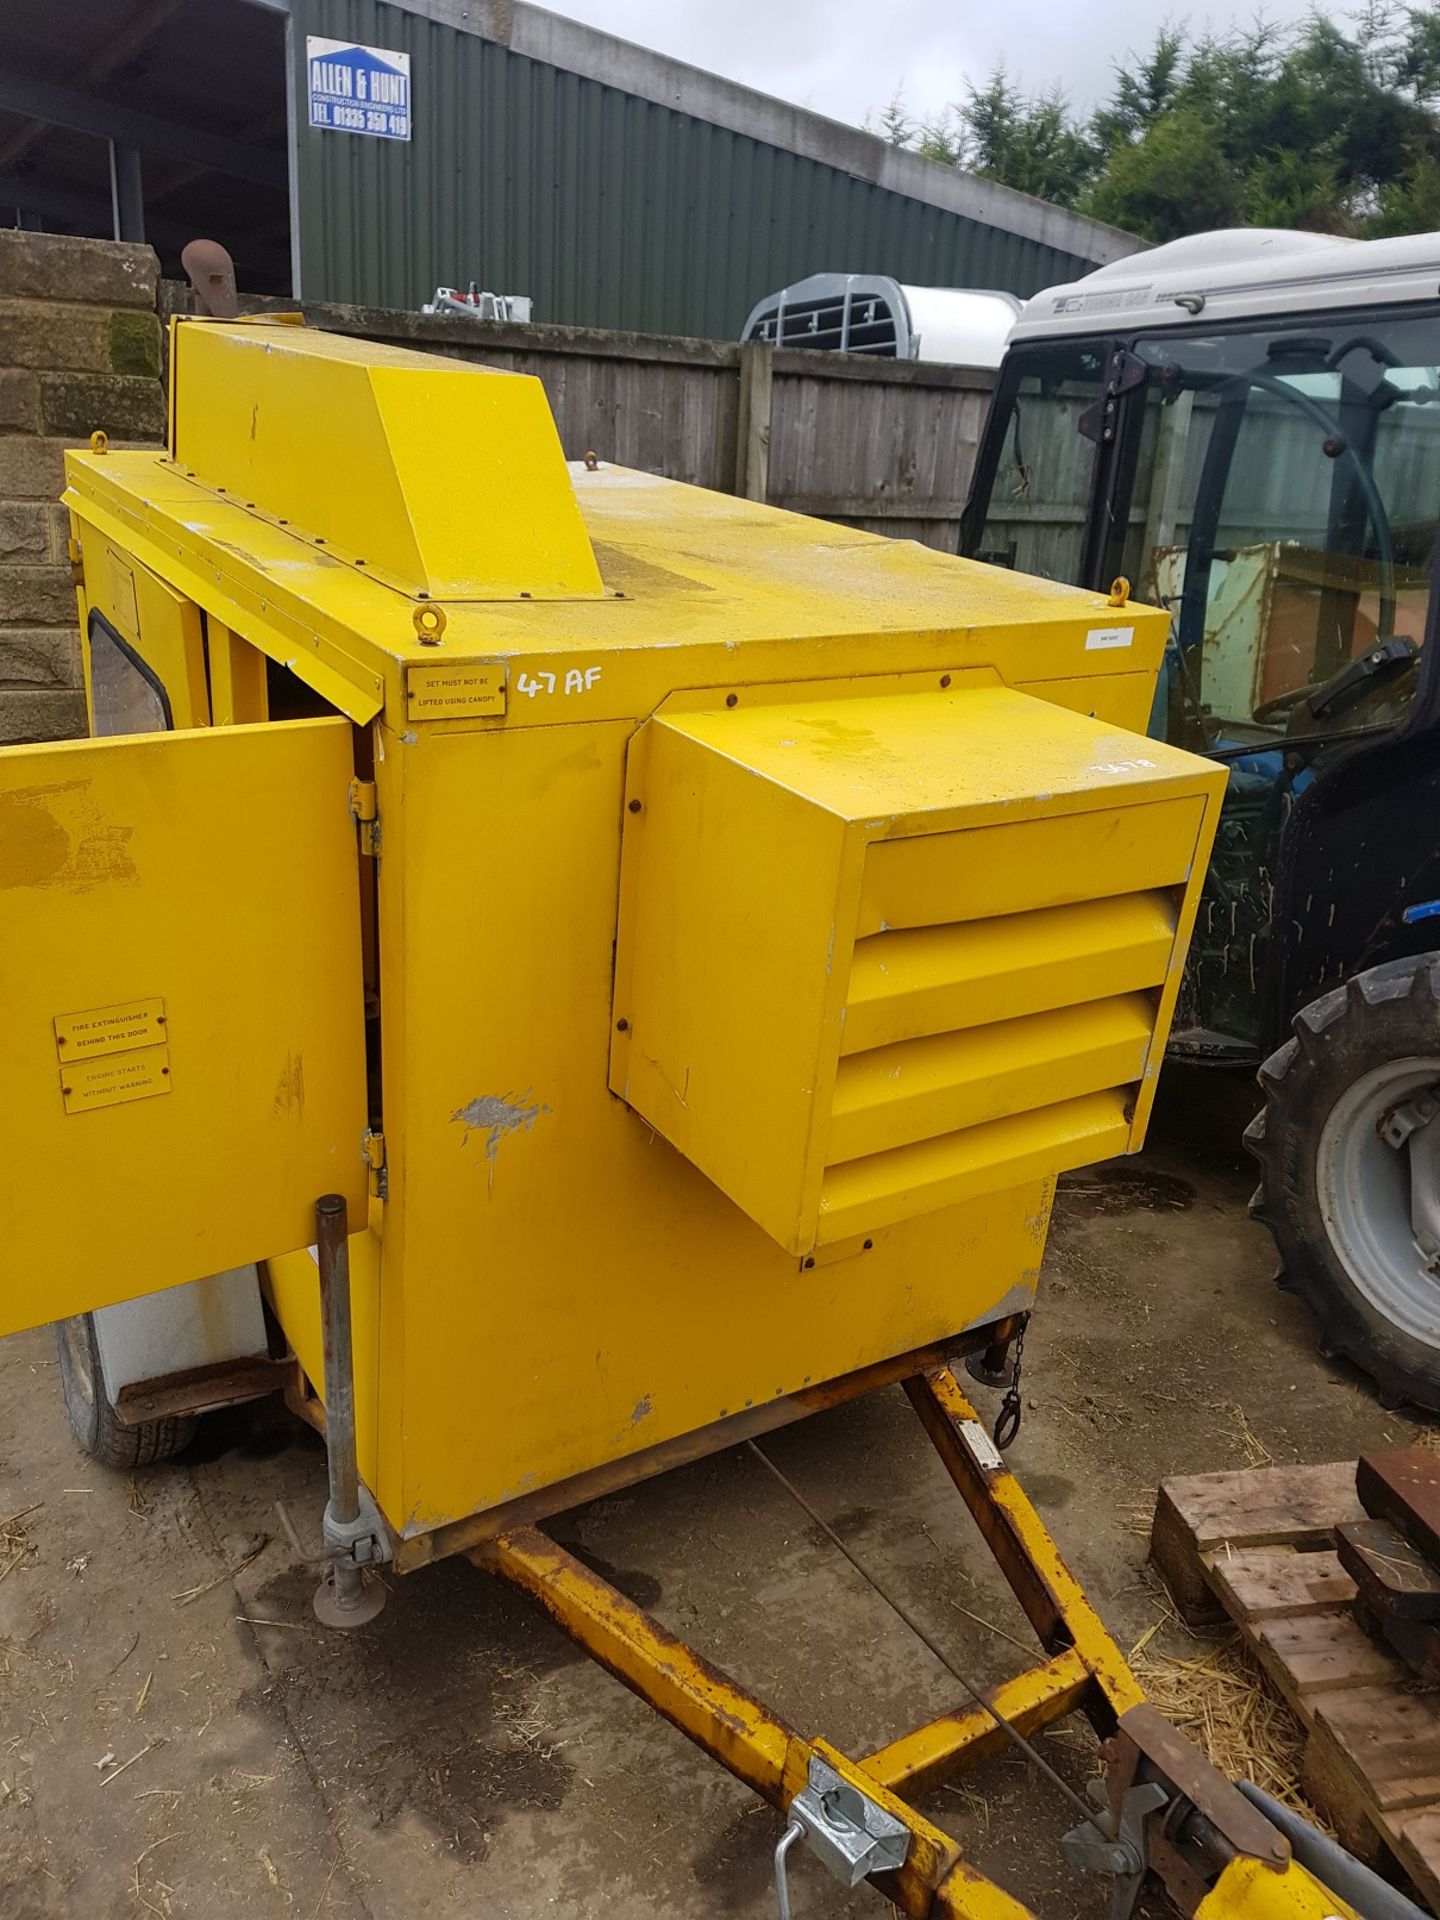 SINGLE AXLE TRAILER WITH GENERATOR, SHOWING 52 HOURS *PLUS VAT*